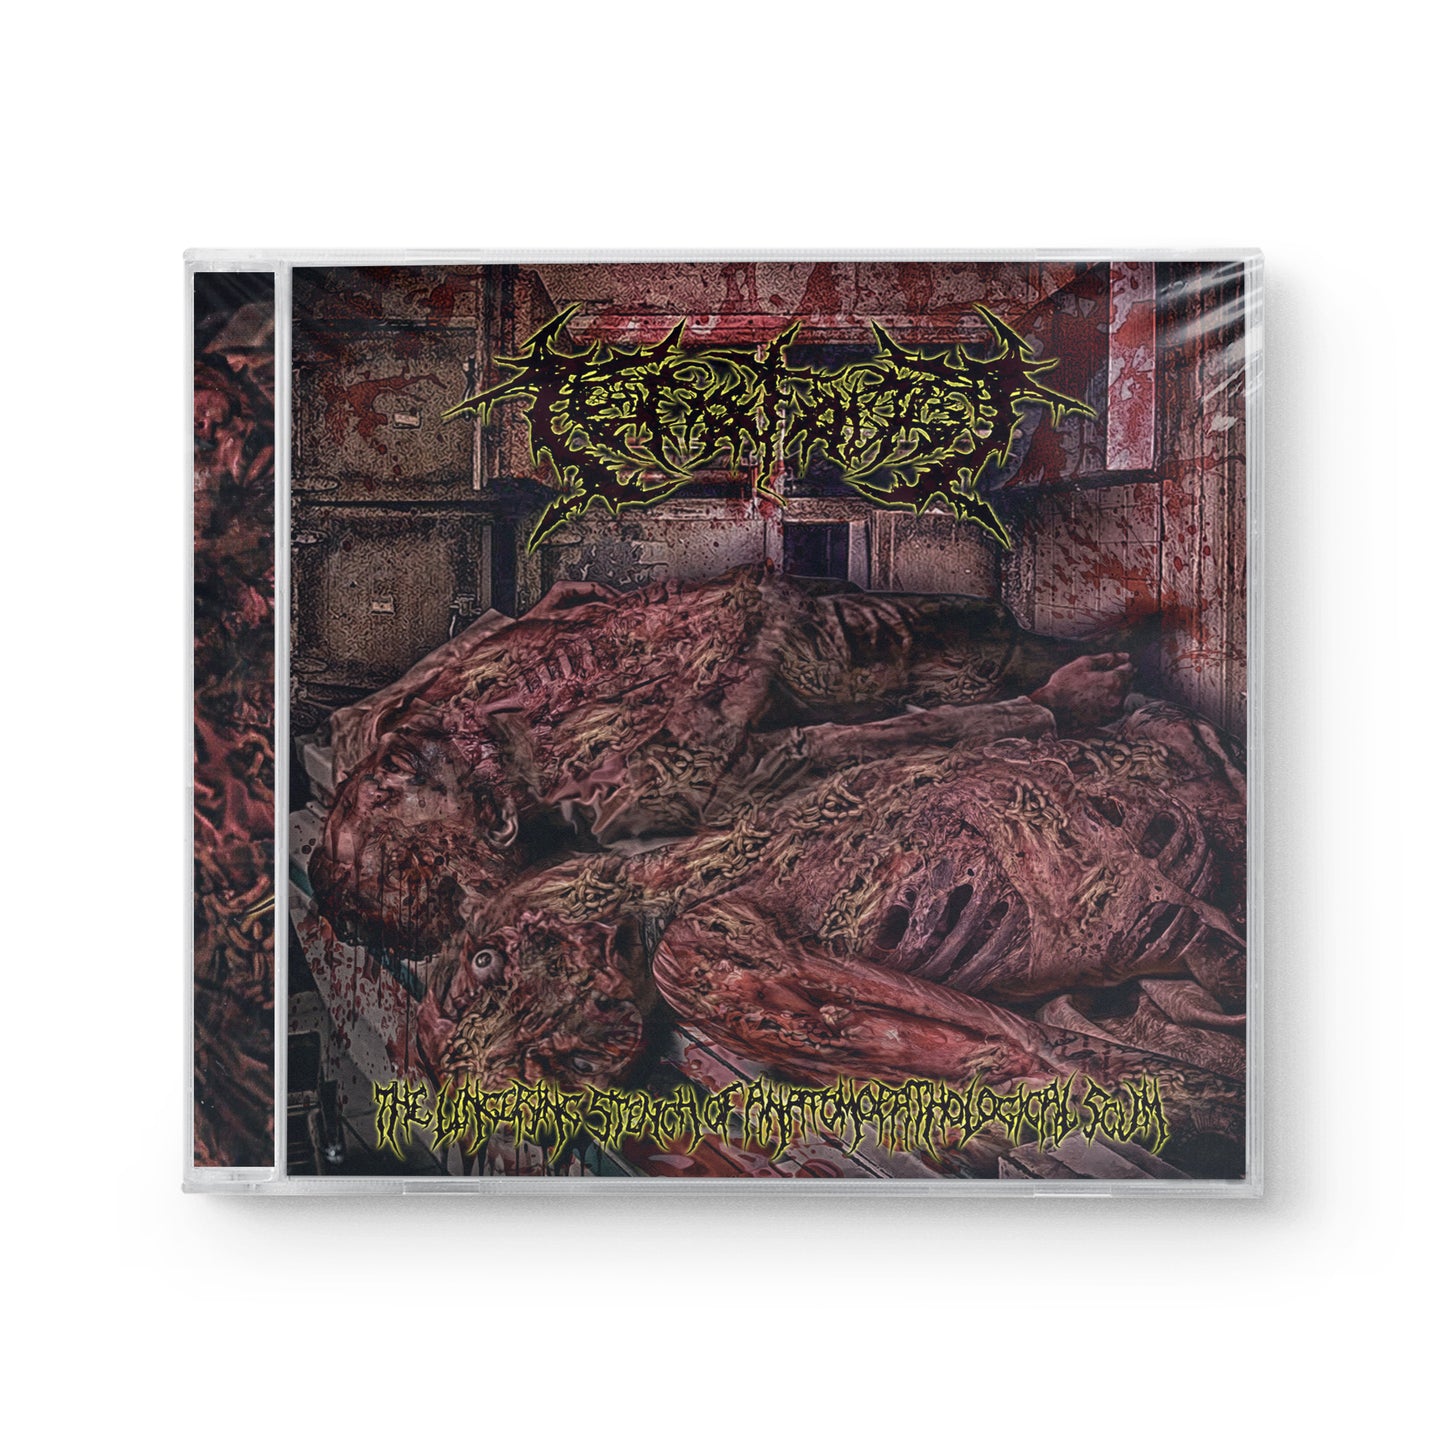 Teratology "The Lingering Stench Of Anatomopathological Scum" CD